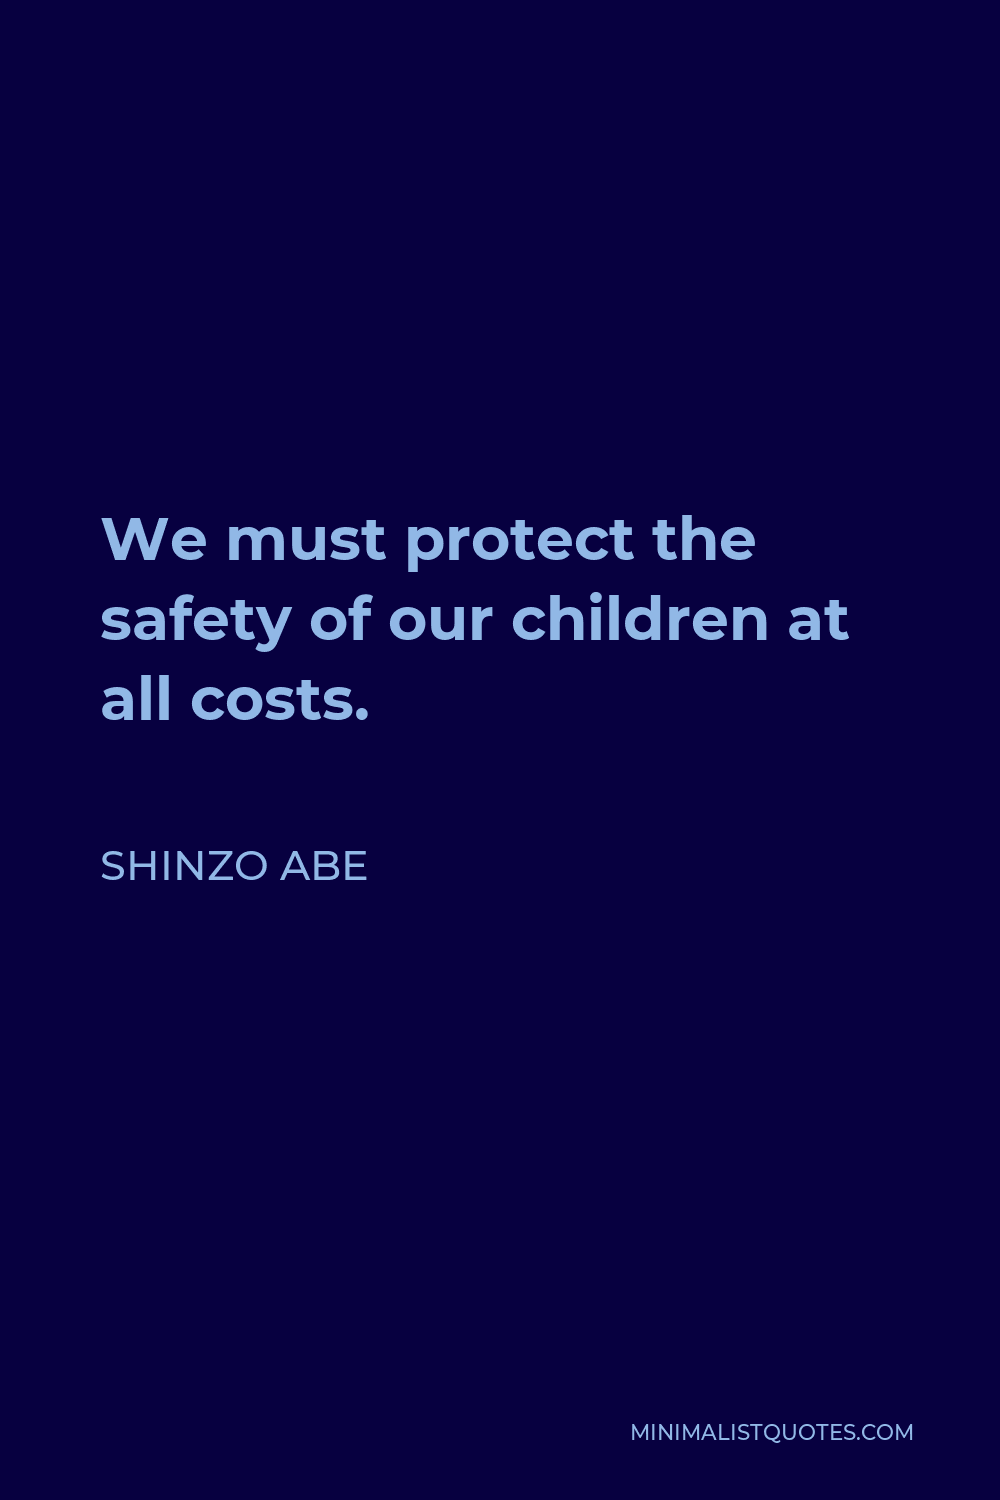 Shinzo Abe Quote - We must protect the safety of our children at all costs.